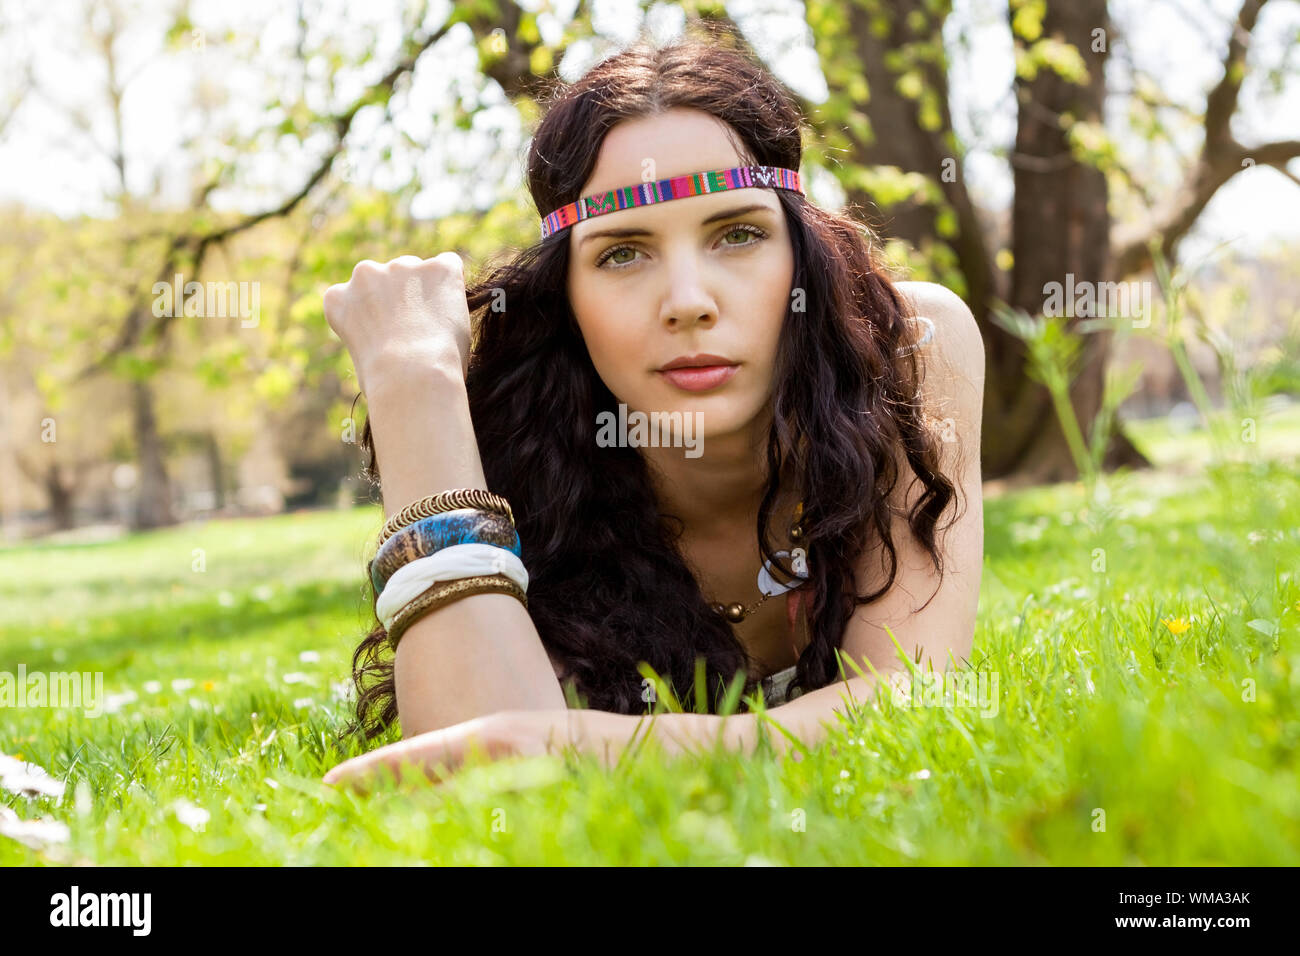 Pretty young woman in a headband daydreaming Stock Photo